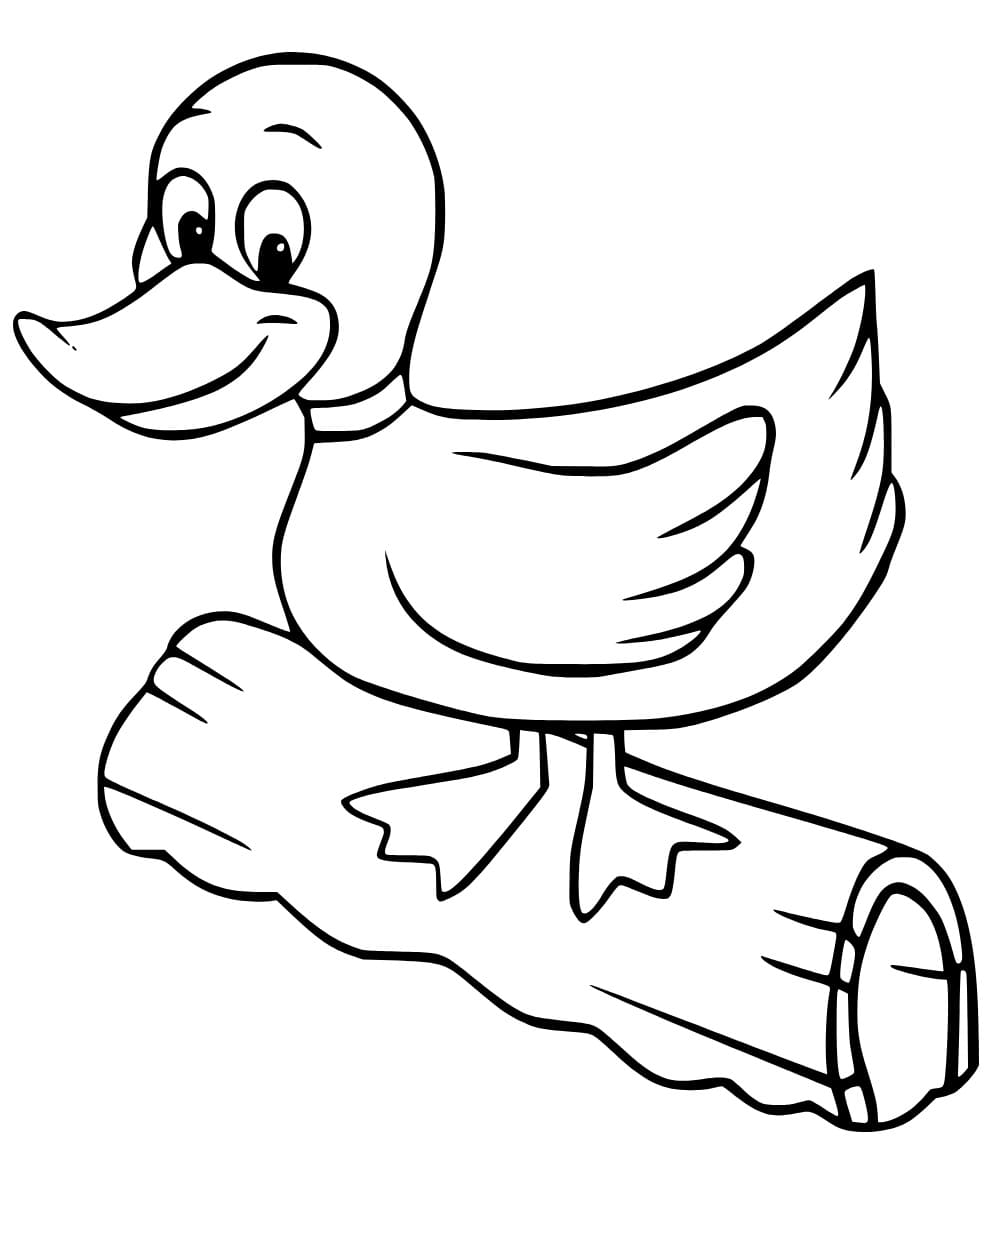 Cute Mallard Duck coloring page - Download, Print or Color Online for Free